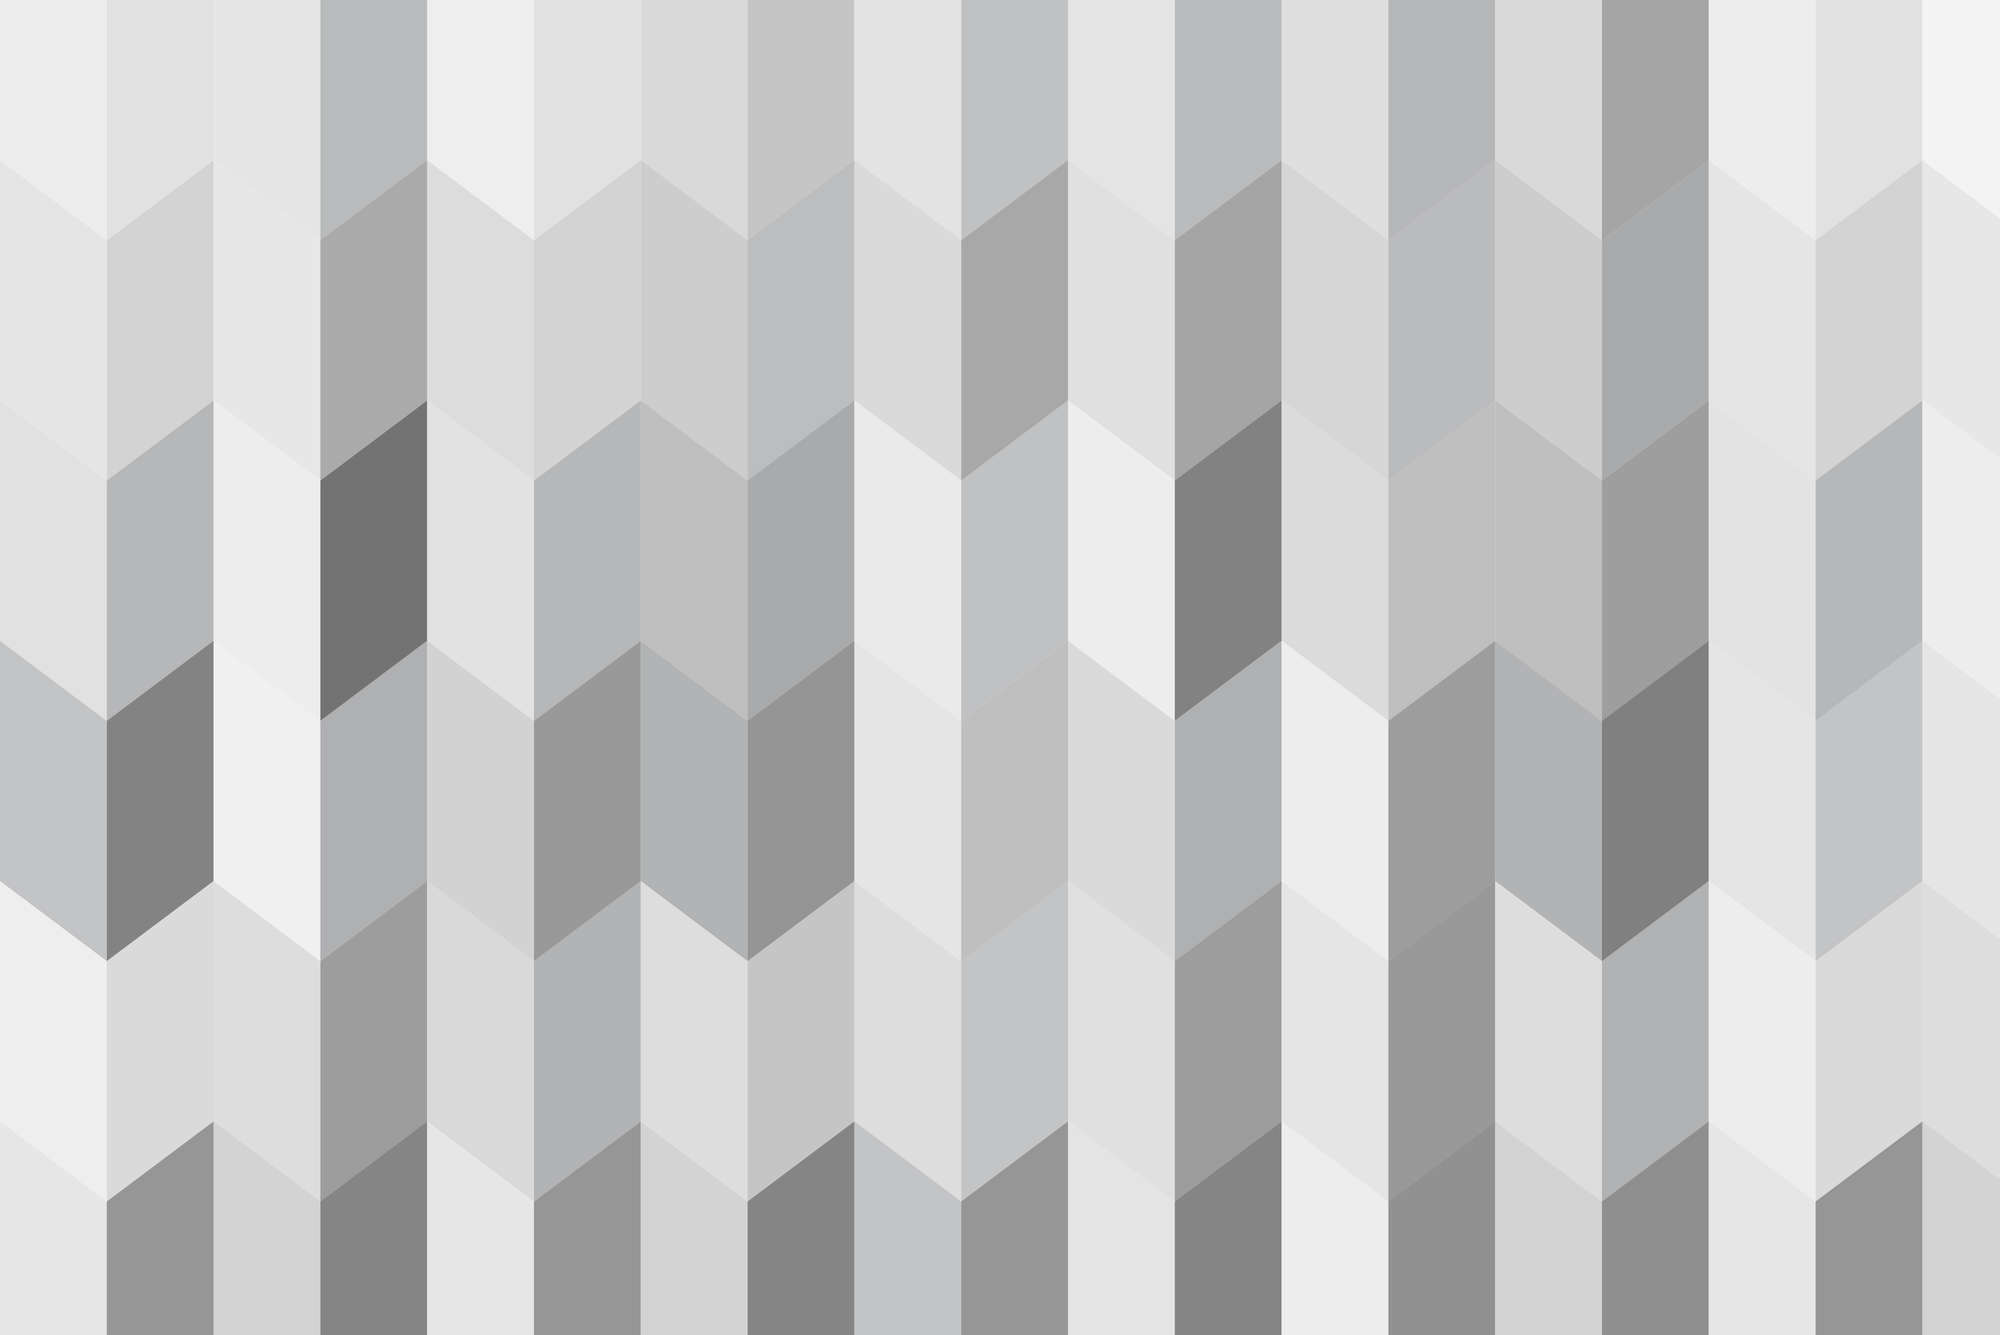             Design wall mural fanned motif grey on premium smooth non-woven
        